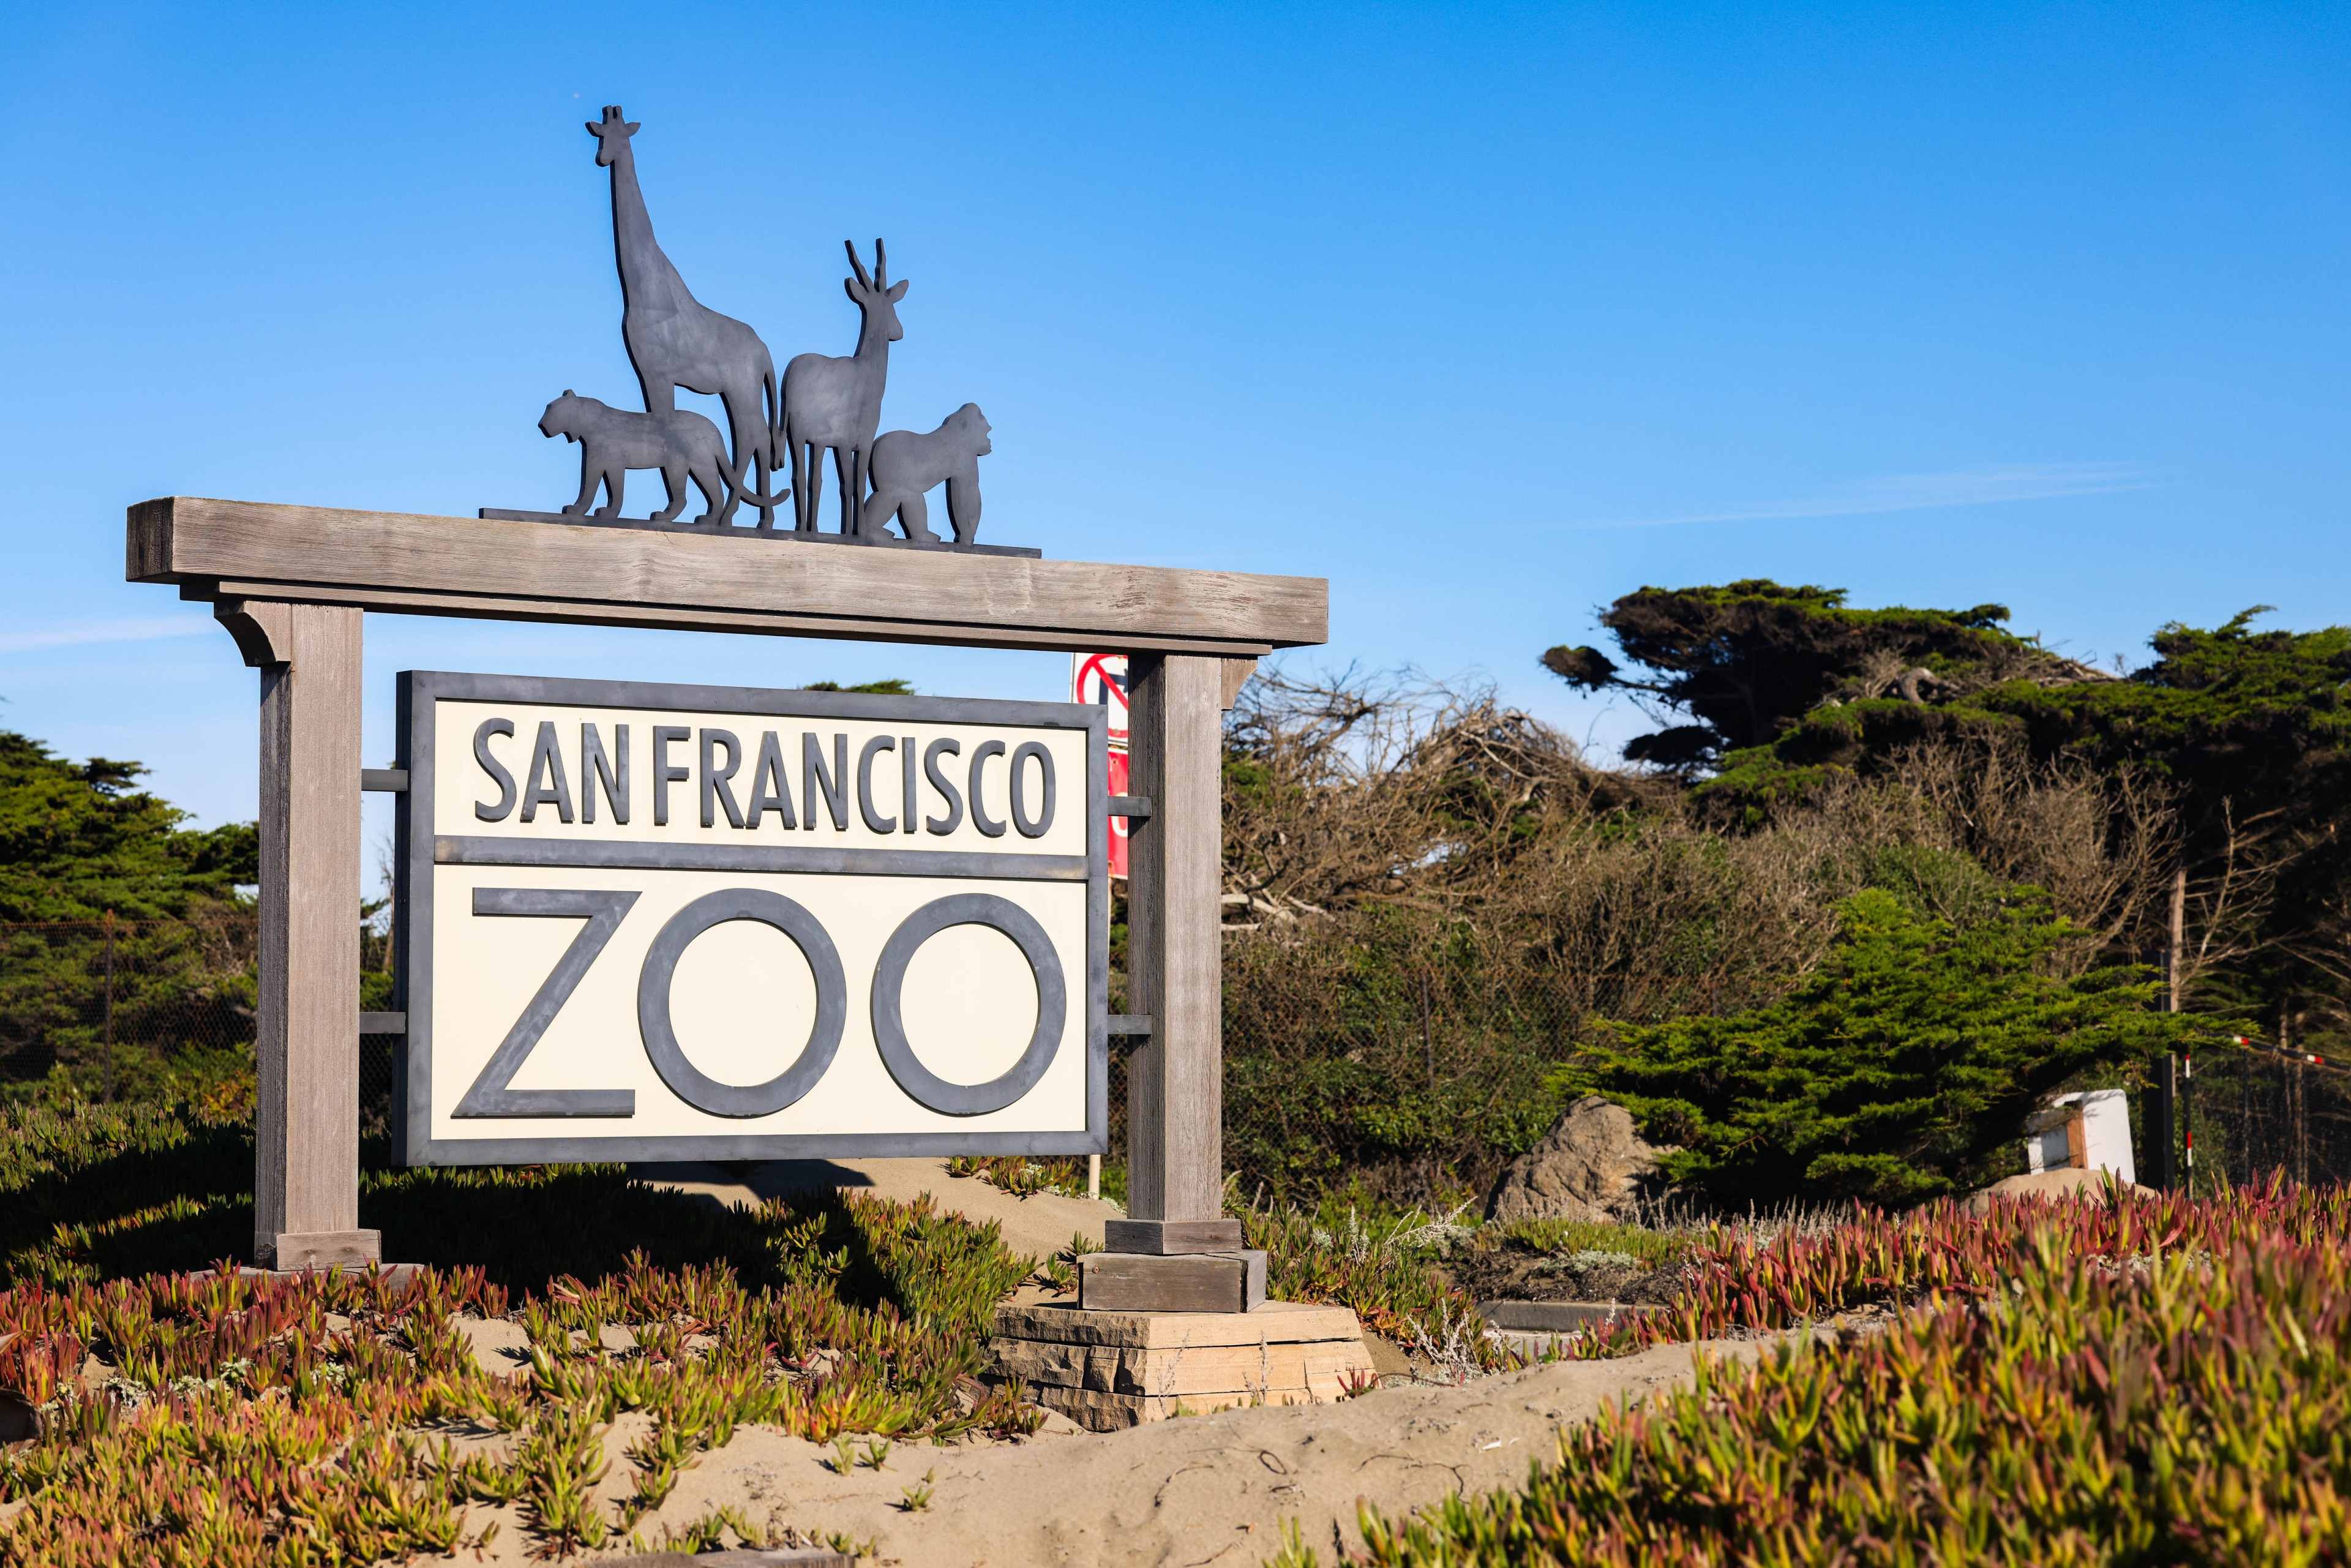 The image shows the San Francisco Zoo sign with animal silhouettes above it, surrounded by greenery under a clear blue sky.